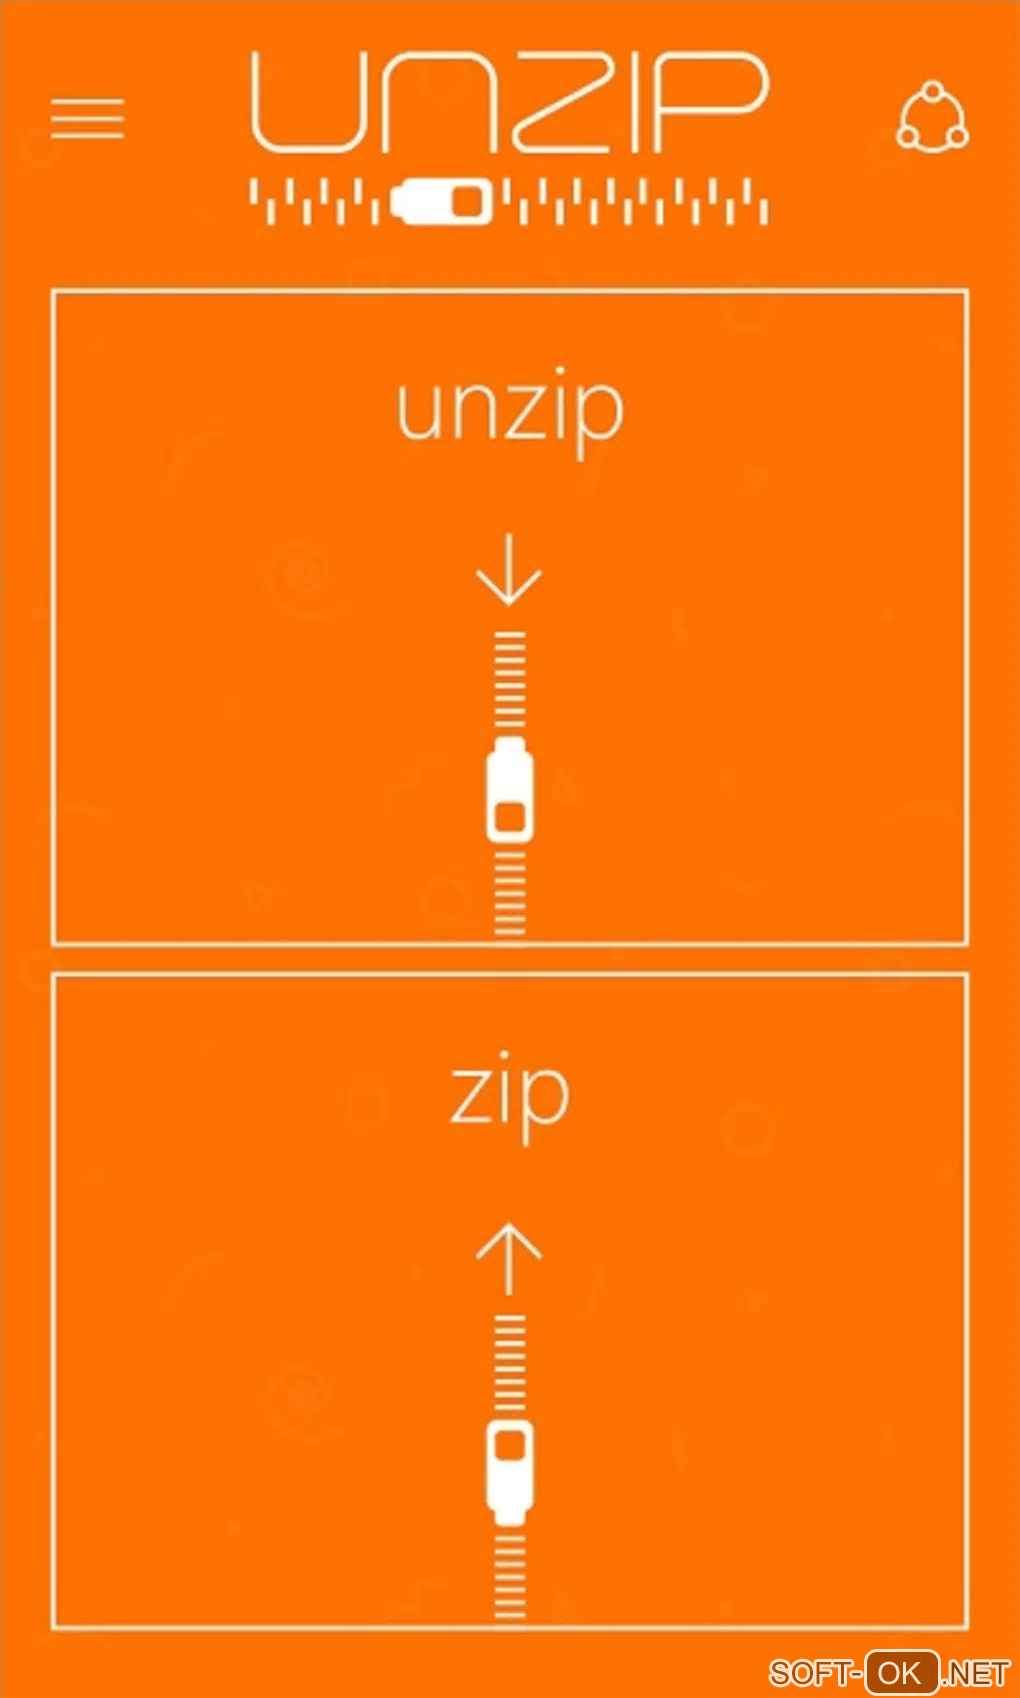 The appearance "UnZip"